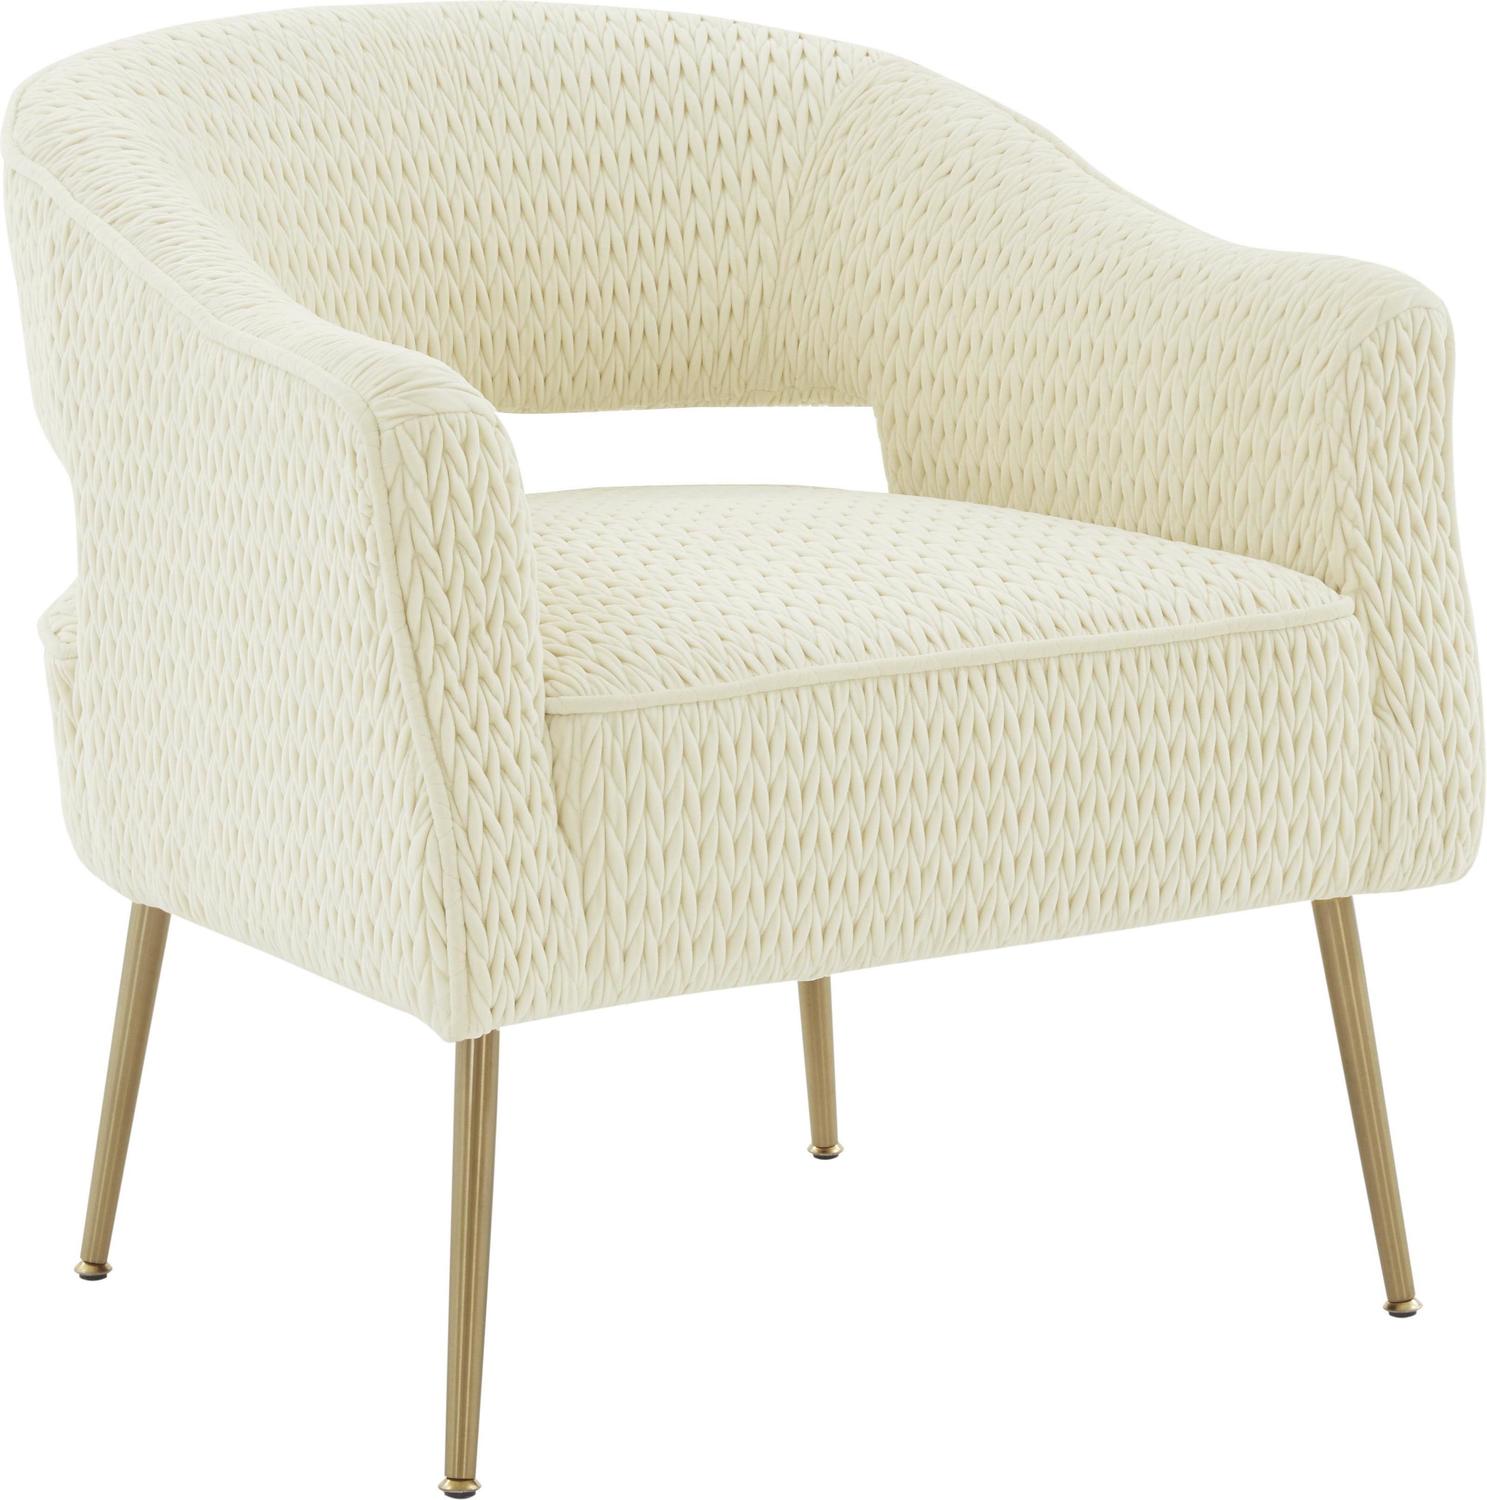 velvet navy blue accent chair Contemporary Design Furniture Accent Chairs Cream